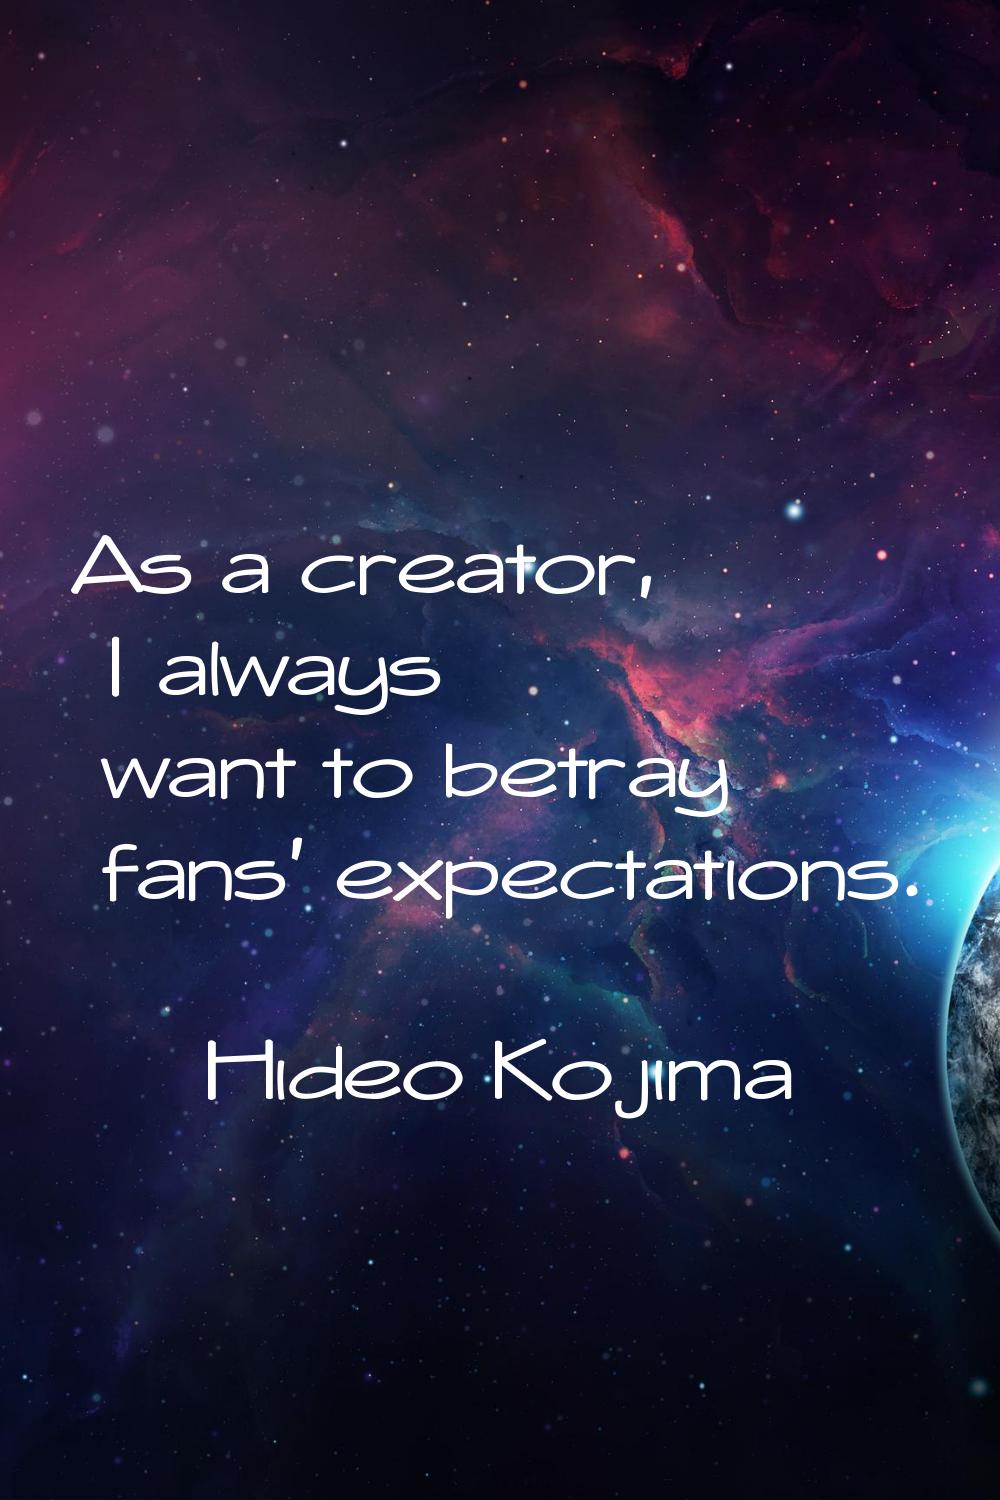 As a creator, I always want to betray fans' expectations.